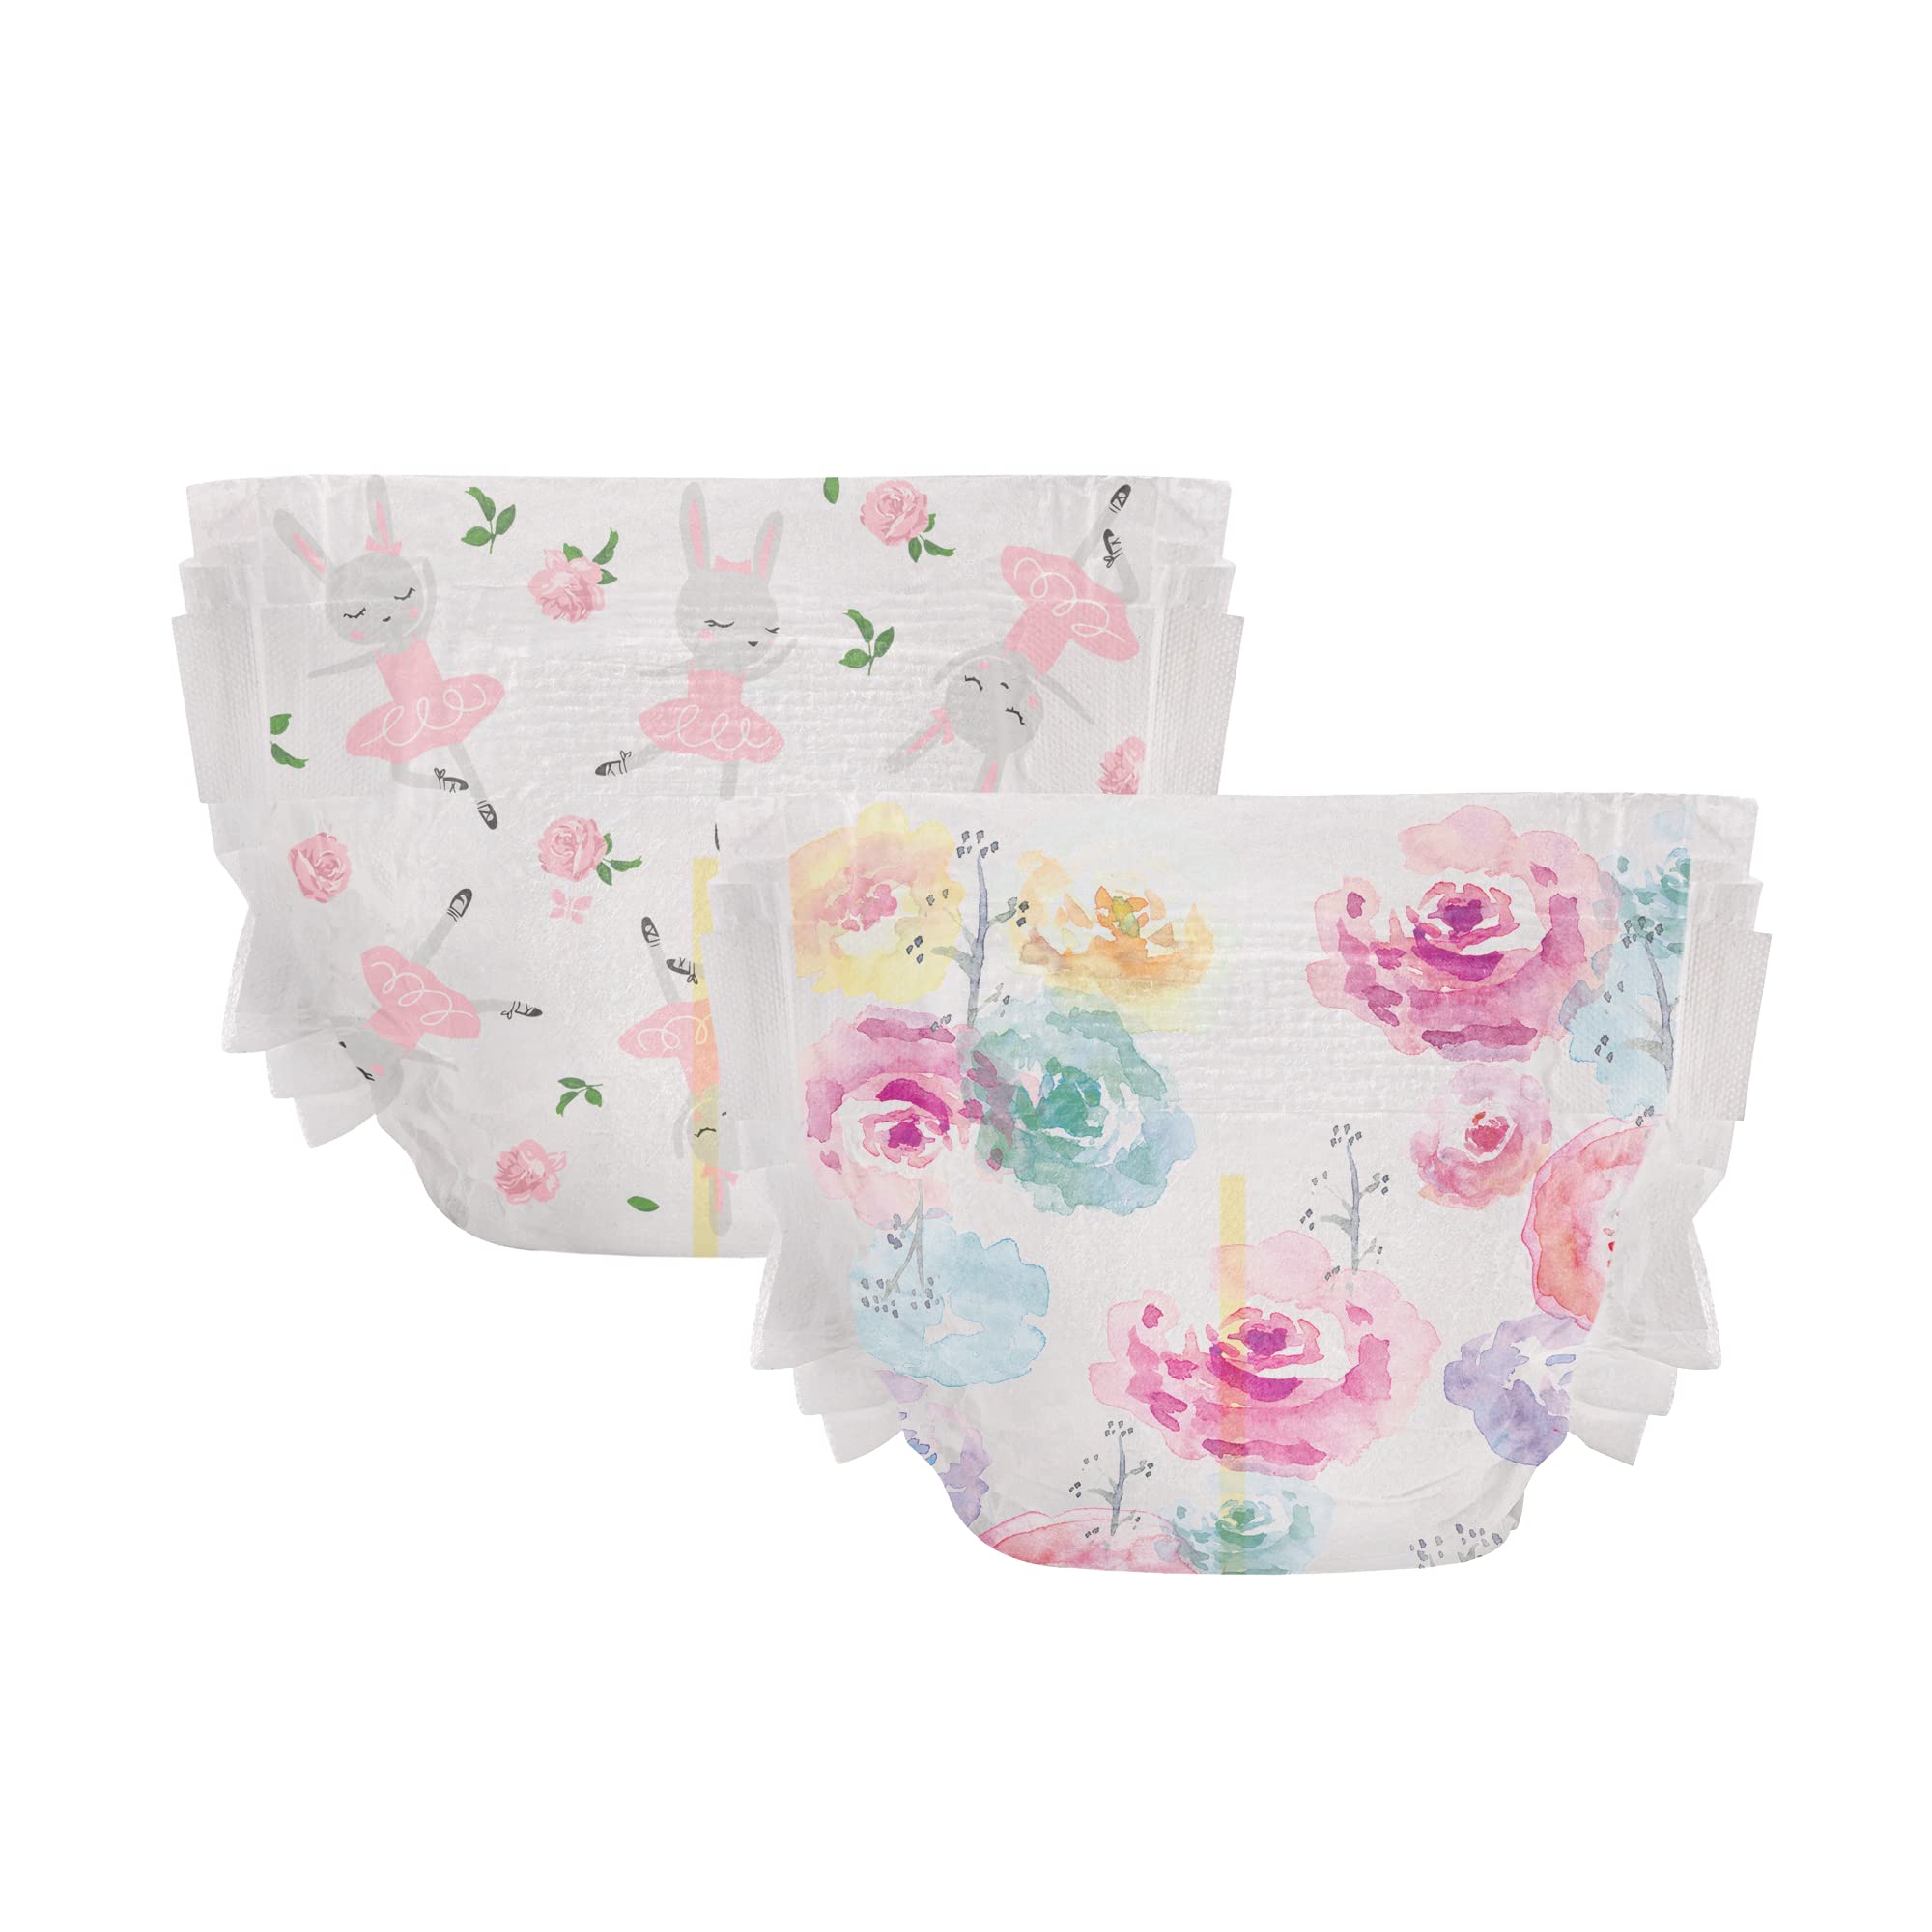 The Honest Company Clean Conscious Diapers | Plant-Based, Sustainable | Rose Blossom + Tutu Cute | Super Club Box, Size 1 (8-14 lbs), 136 Count